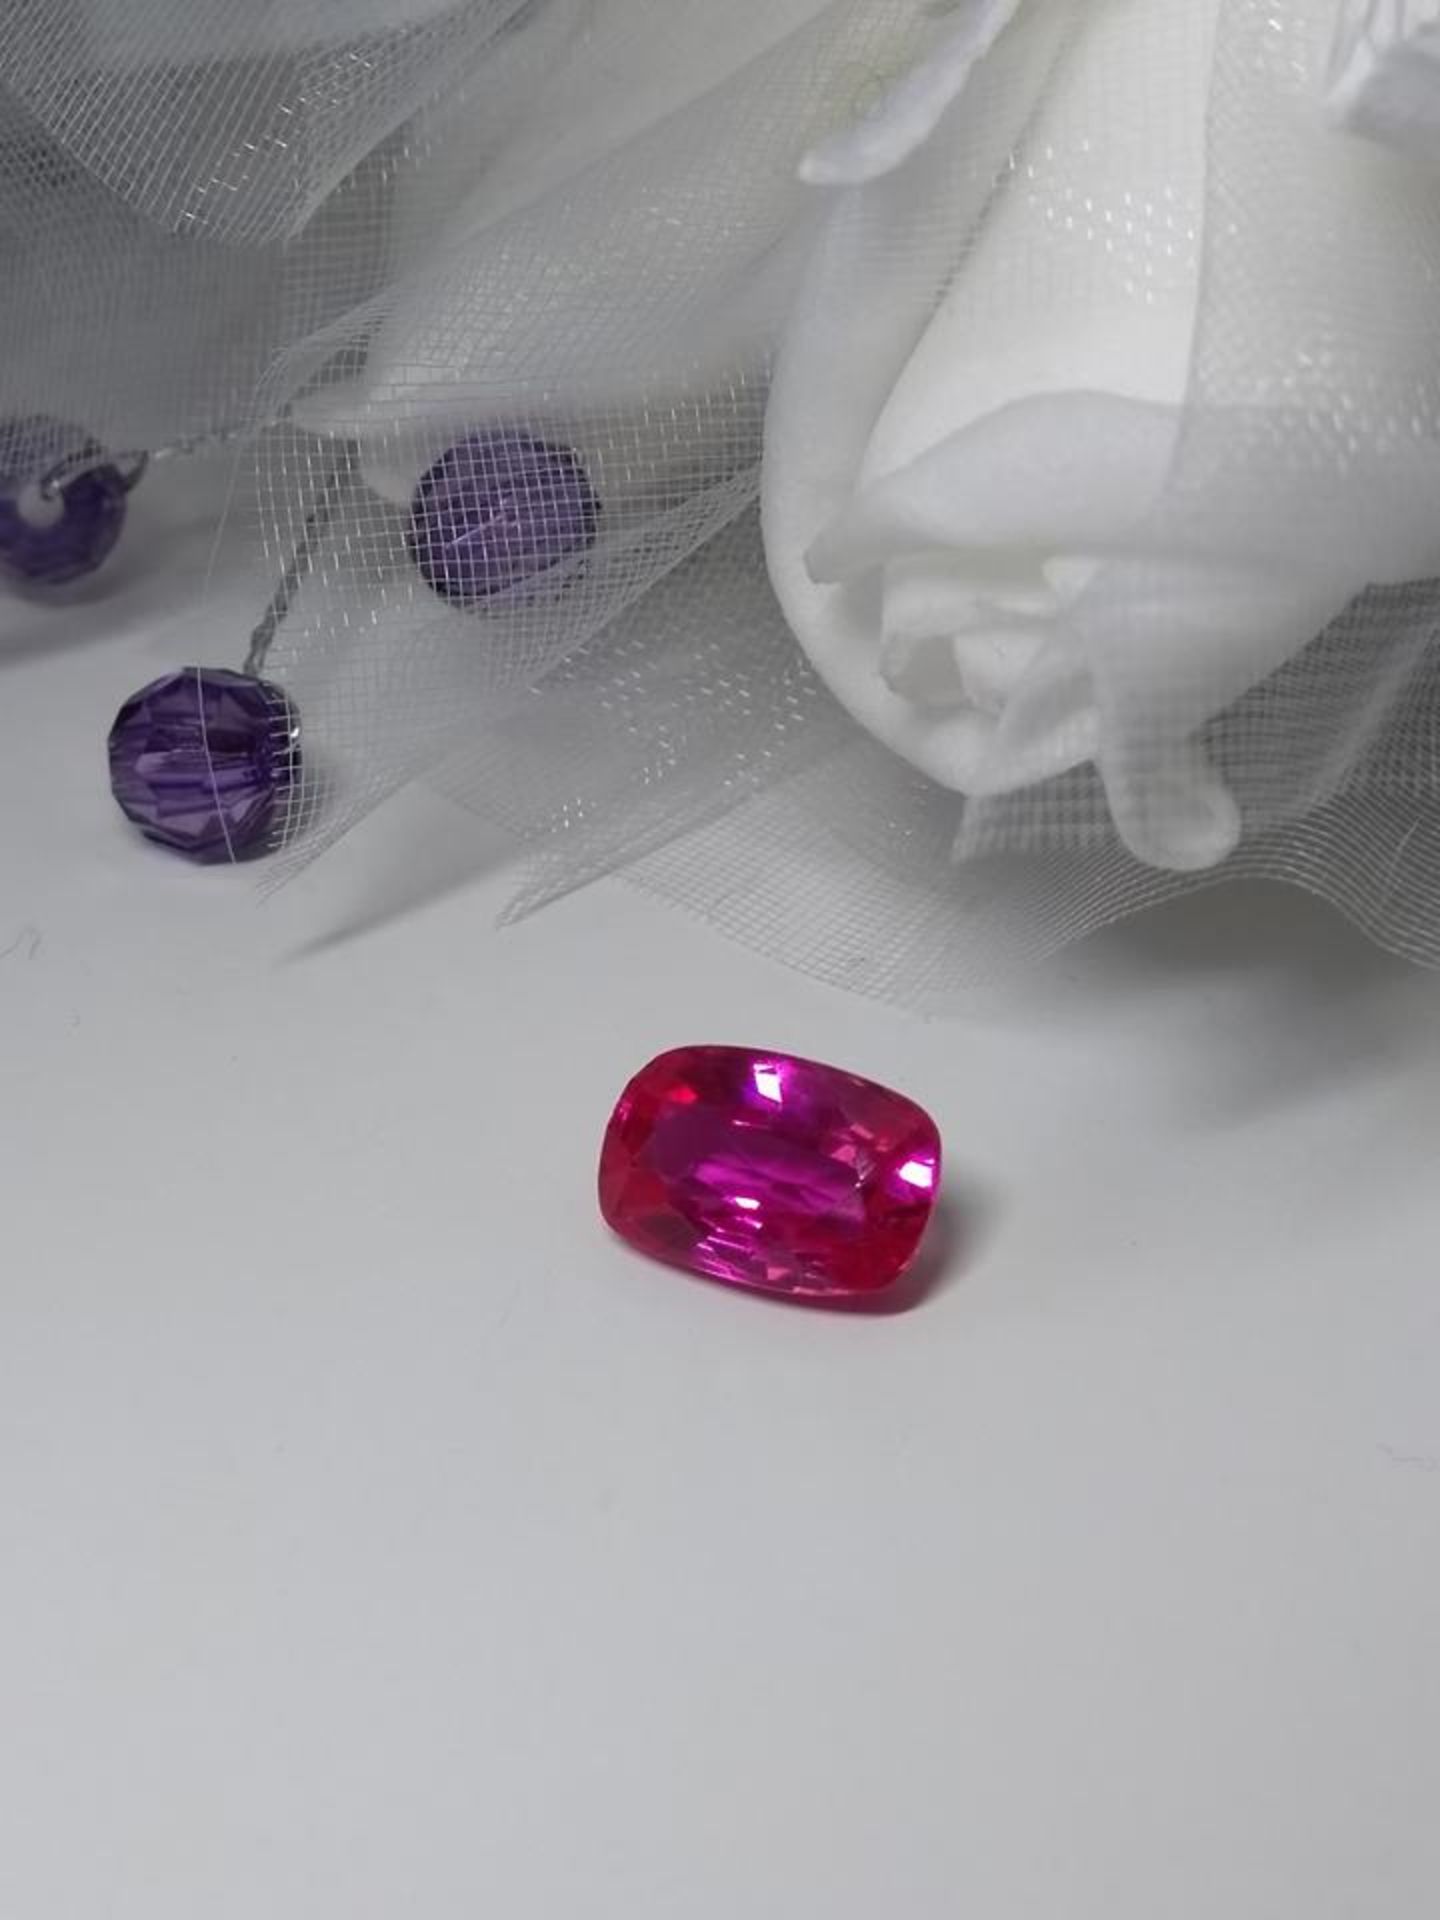 AGI Certified Natural 5.91 carat Spinel, Stunning Pink Colour - VS Clarity - Modified Cushion Shape - Image 2 of 3